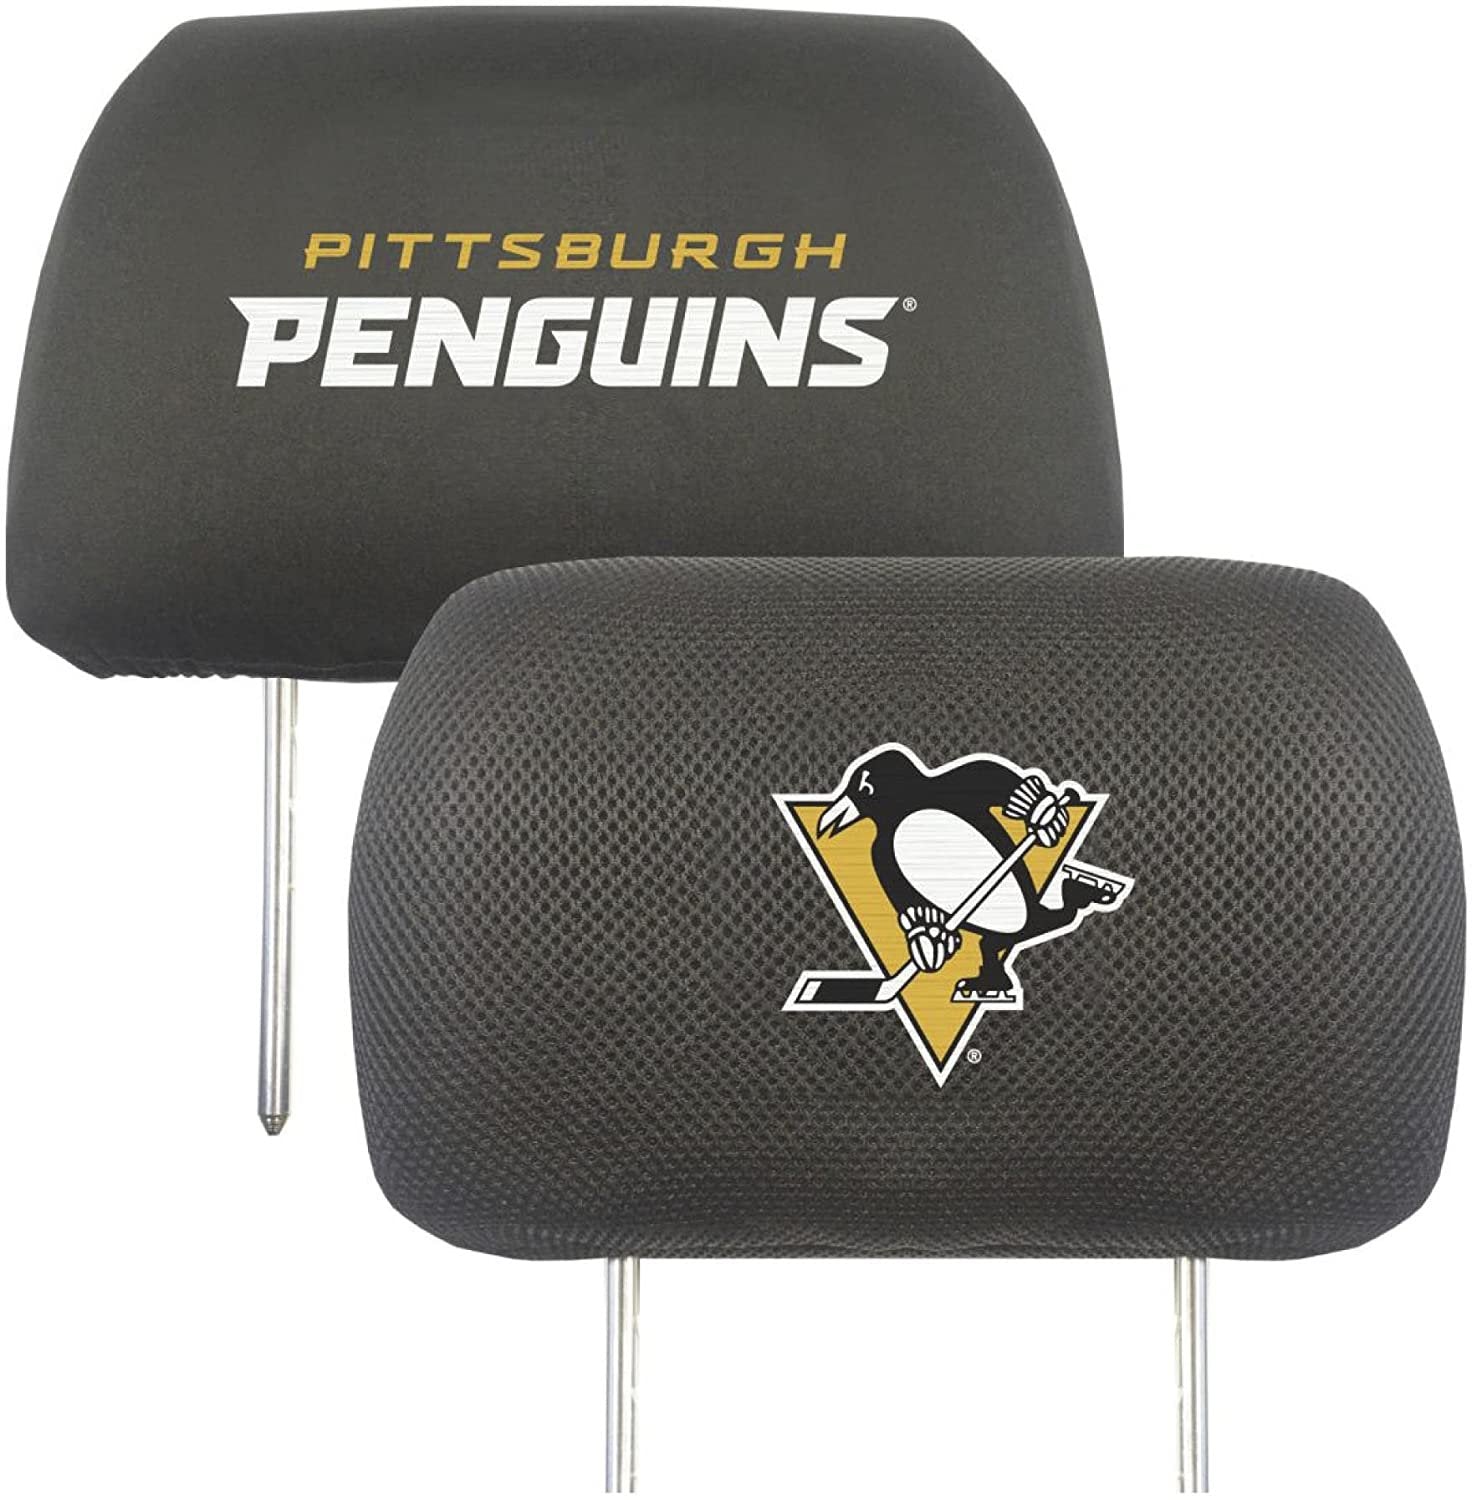 Pittsburgh Penguins Pair of Premium Auto Head Rest Covers, Embroidered, Black Elastic, 14x10 Inch